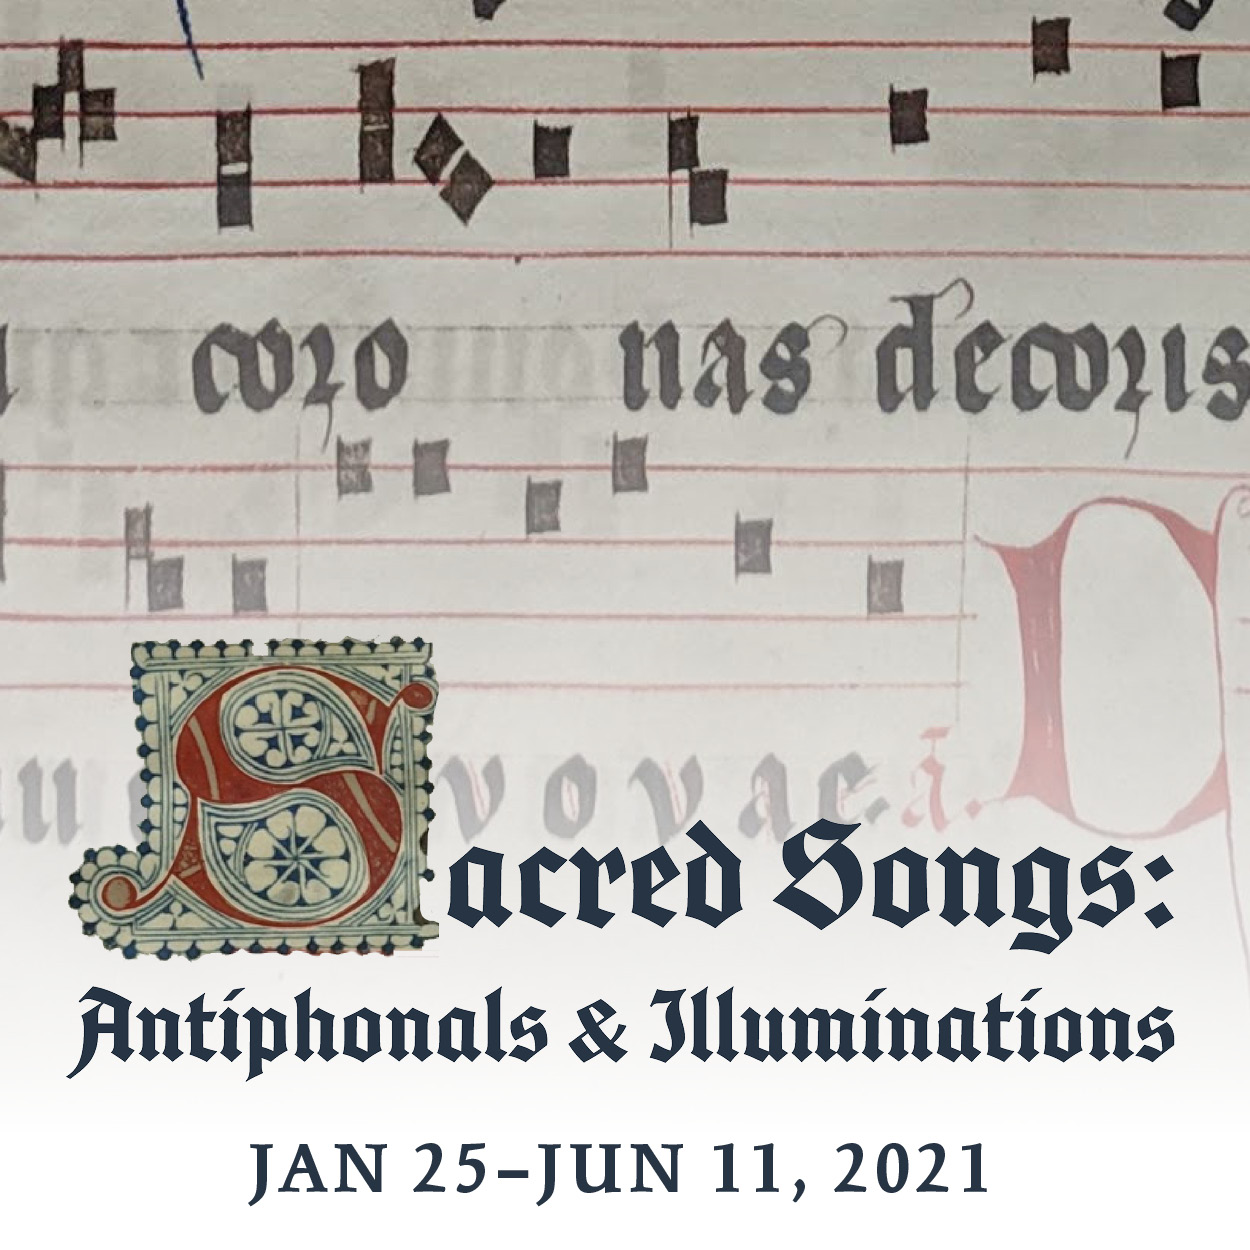 Sacred Songs: Antiphonals and Illuminations January 25-June 11, 2021